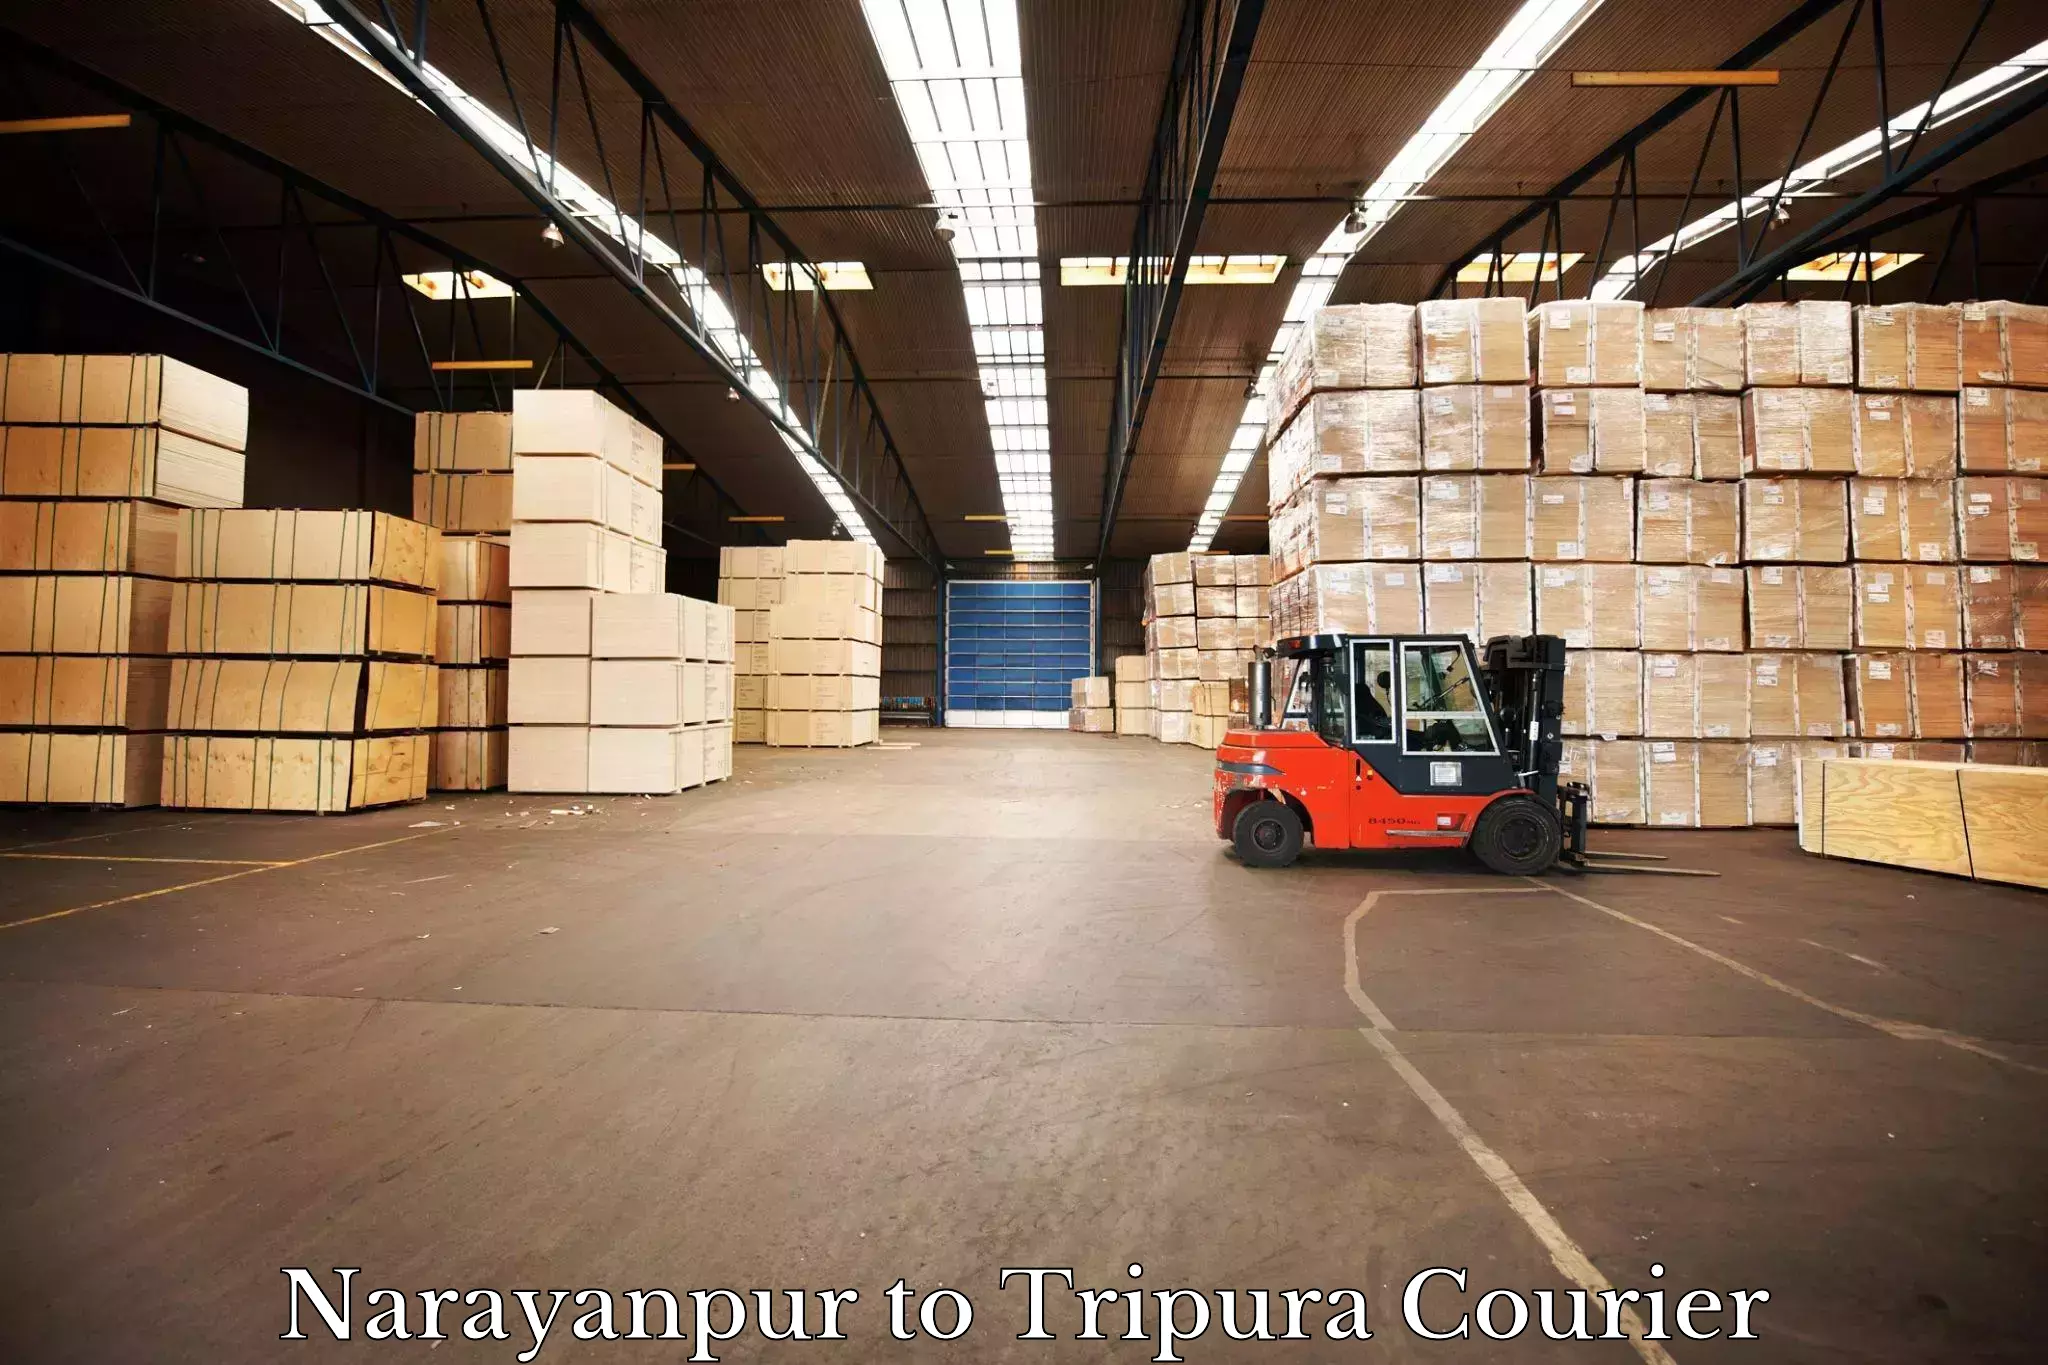 State-of-the-art courier technology Narayanpur to Udaipur Tripura